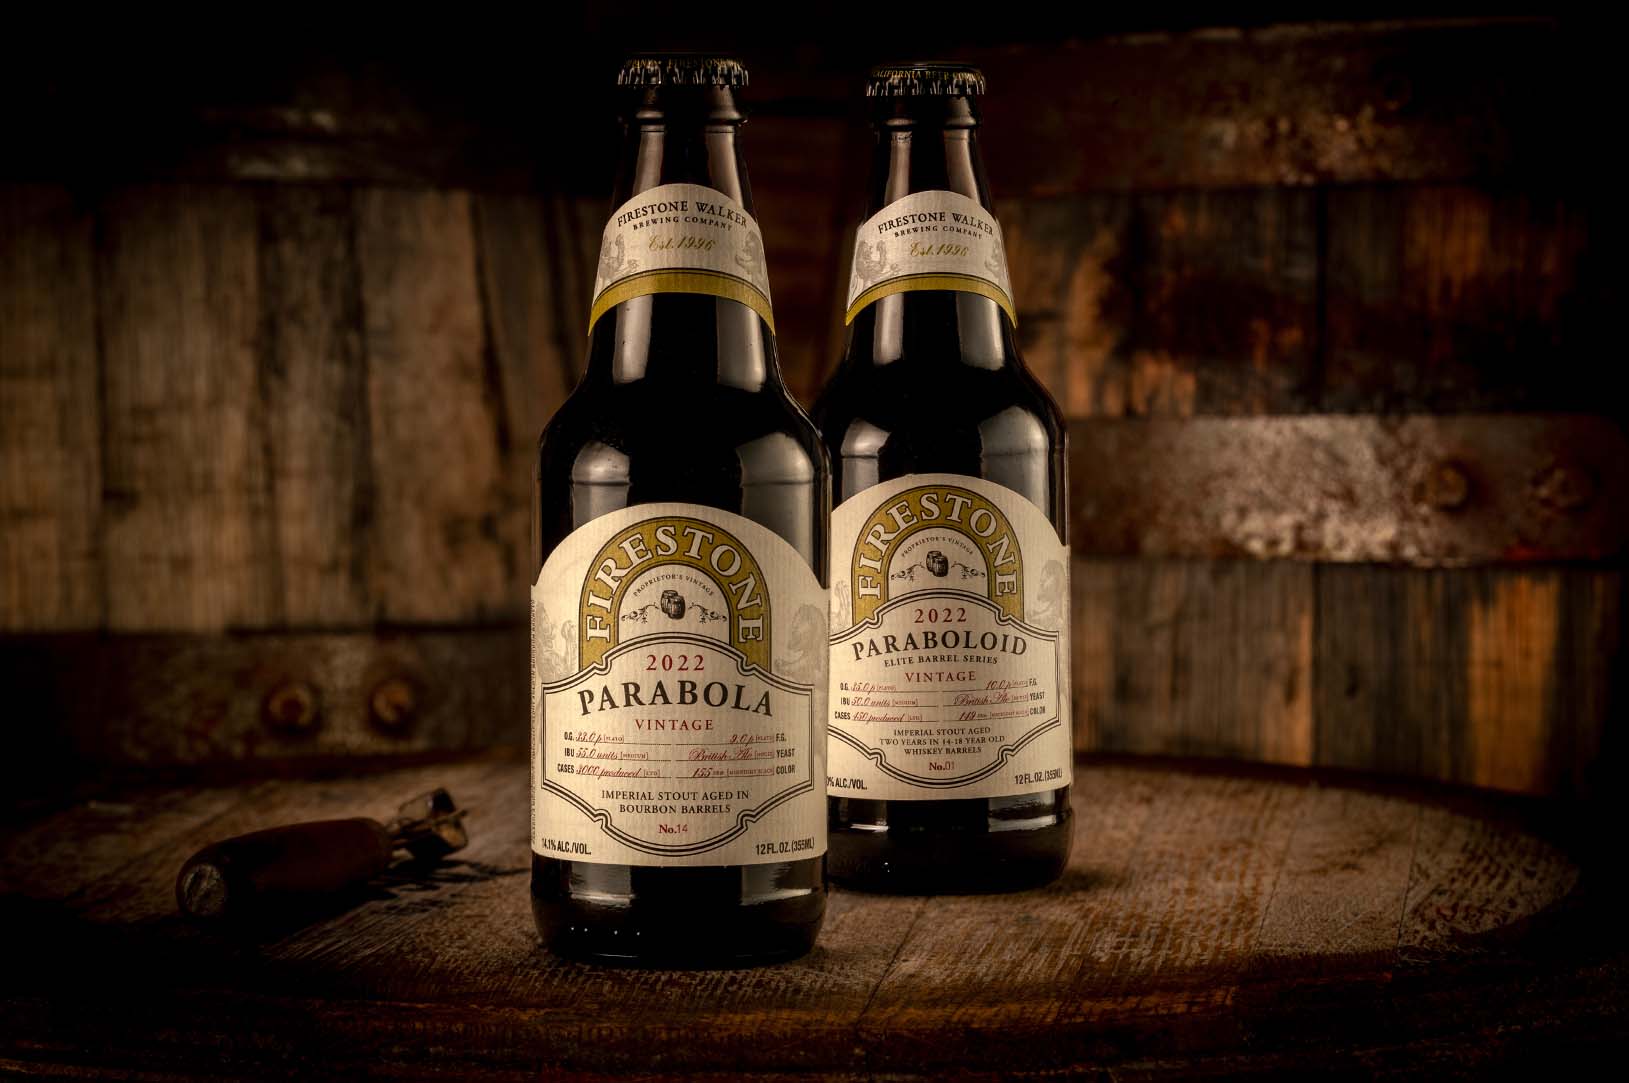 image of 2022 Parabola and Paraboloid courtesy of Firestone Walker Brewing